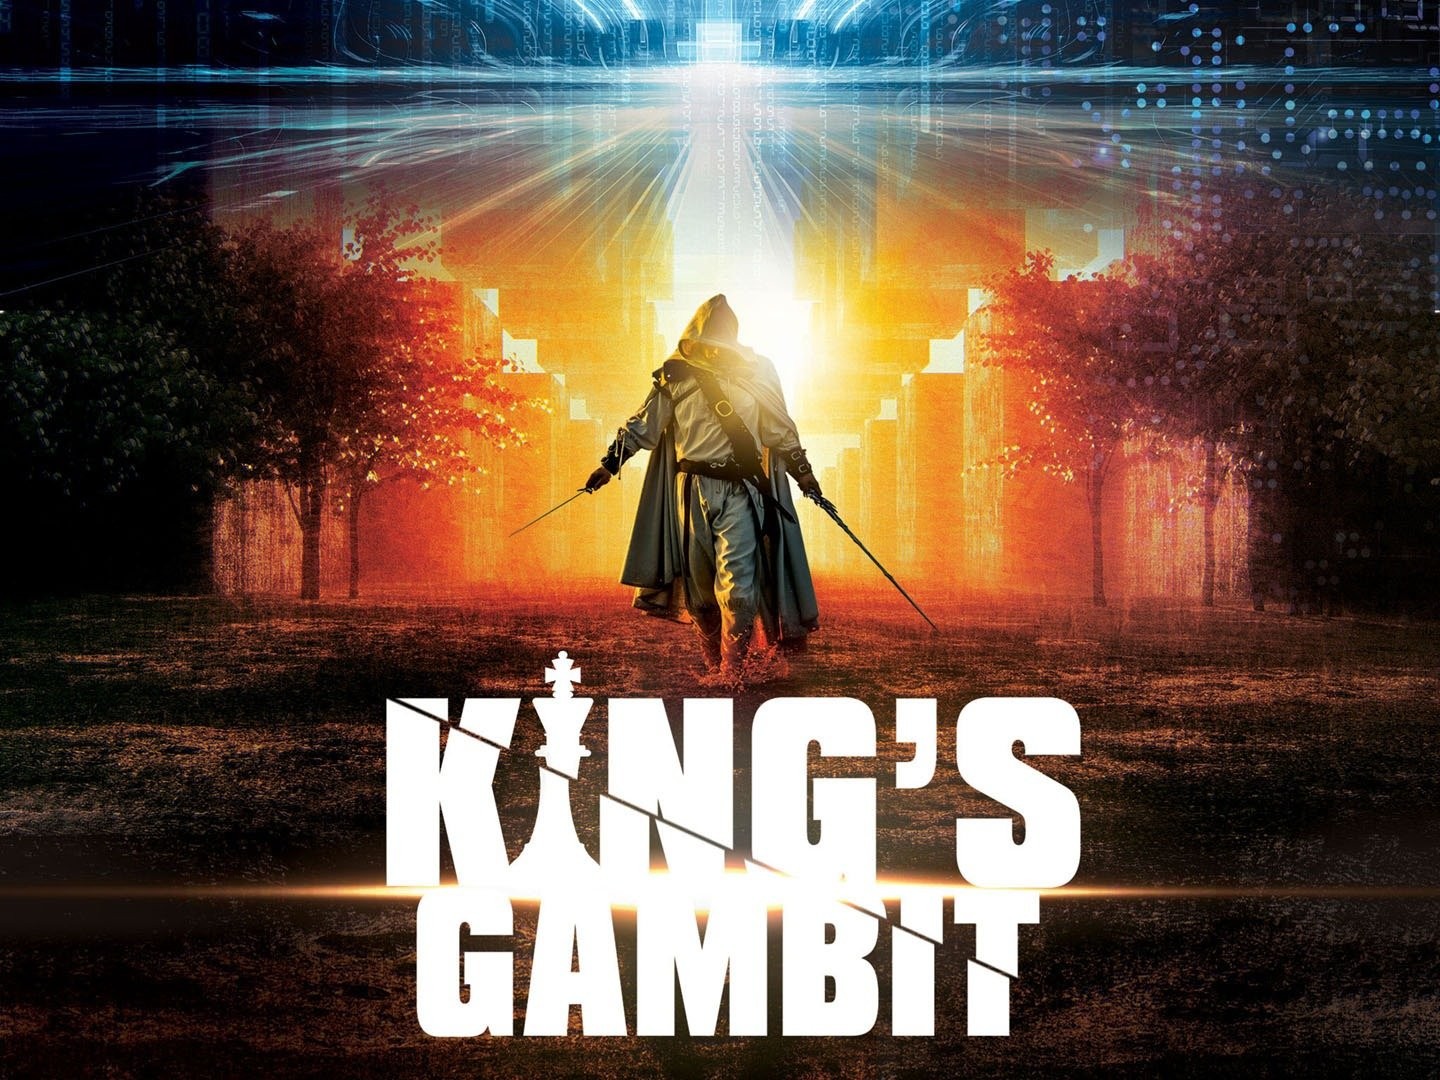 King Gambit may be strong, but the Moon & Sun will always rise